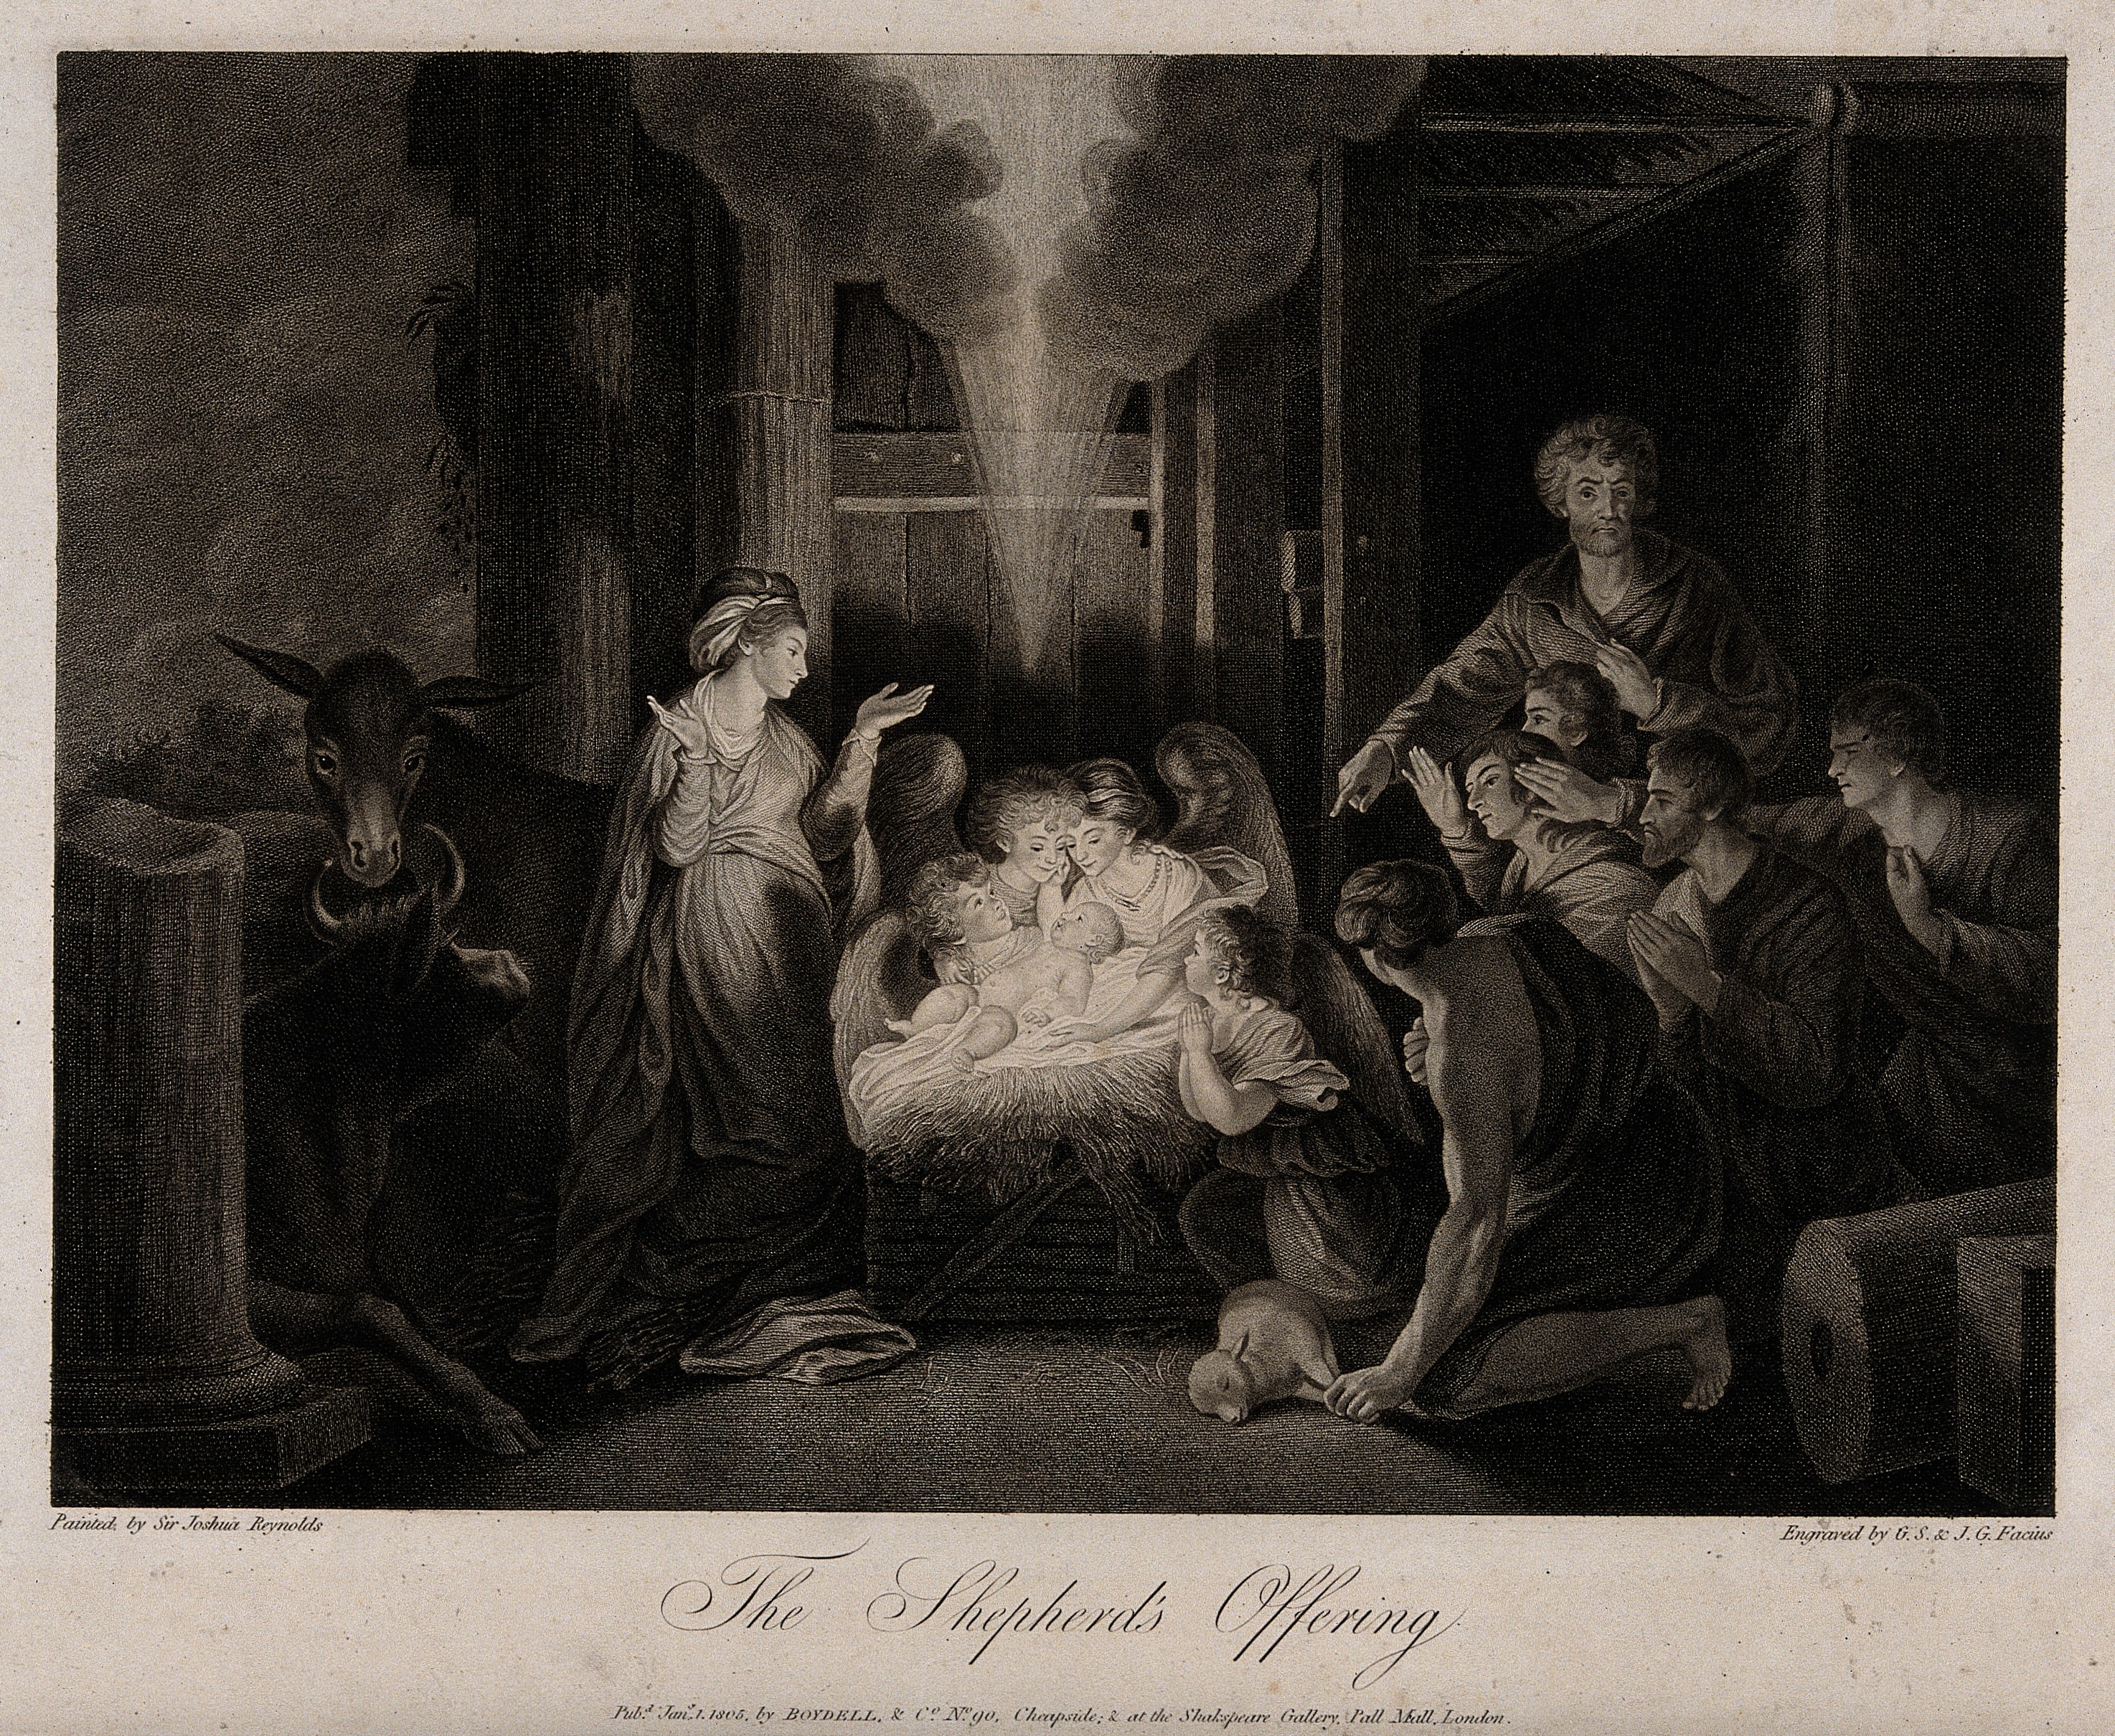 The adoration of the shepherds at the birth of Christ. Aquat Wellcome V0034625